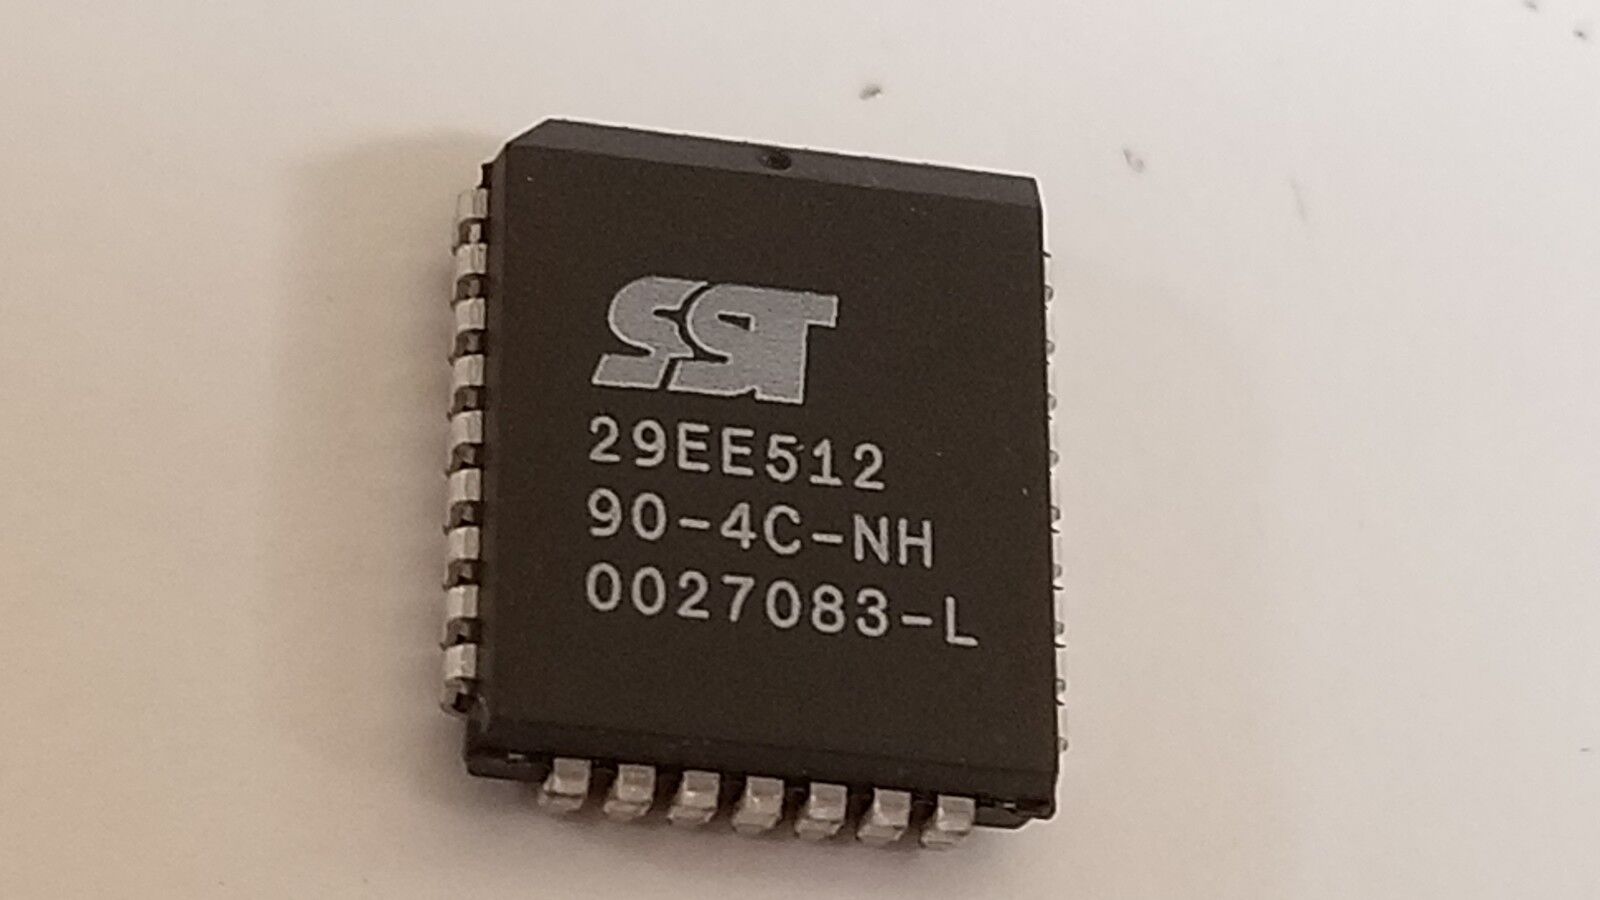 SST 29EE512-90-4C-NH PLCC FLASH EEPROM BRAND NEW OLD STOCK